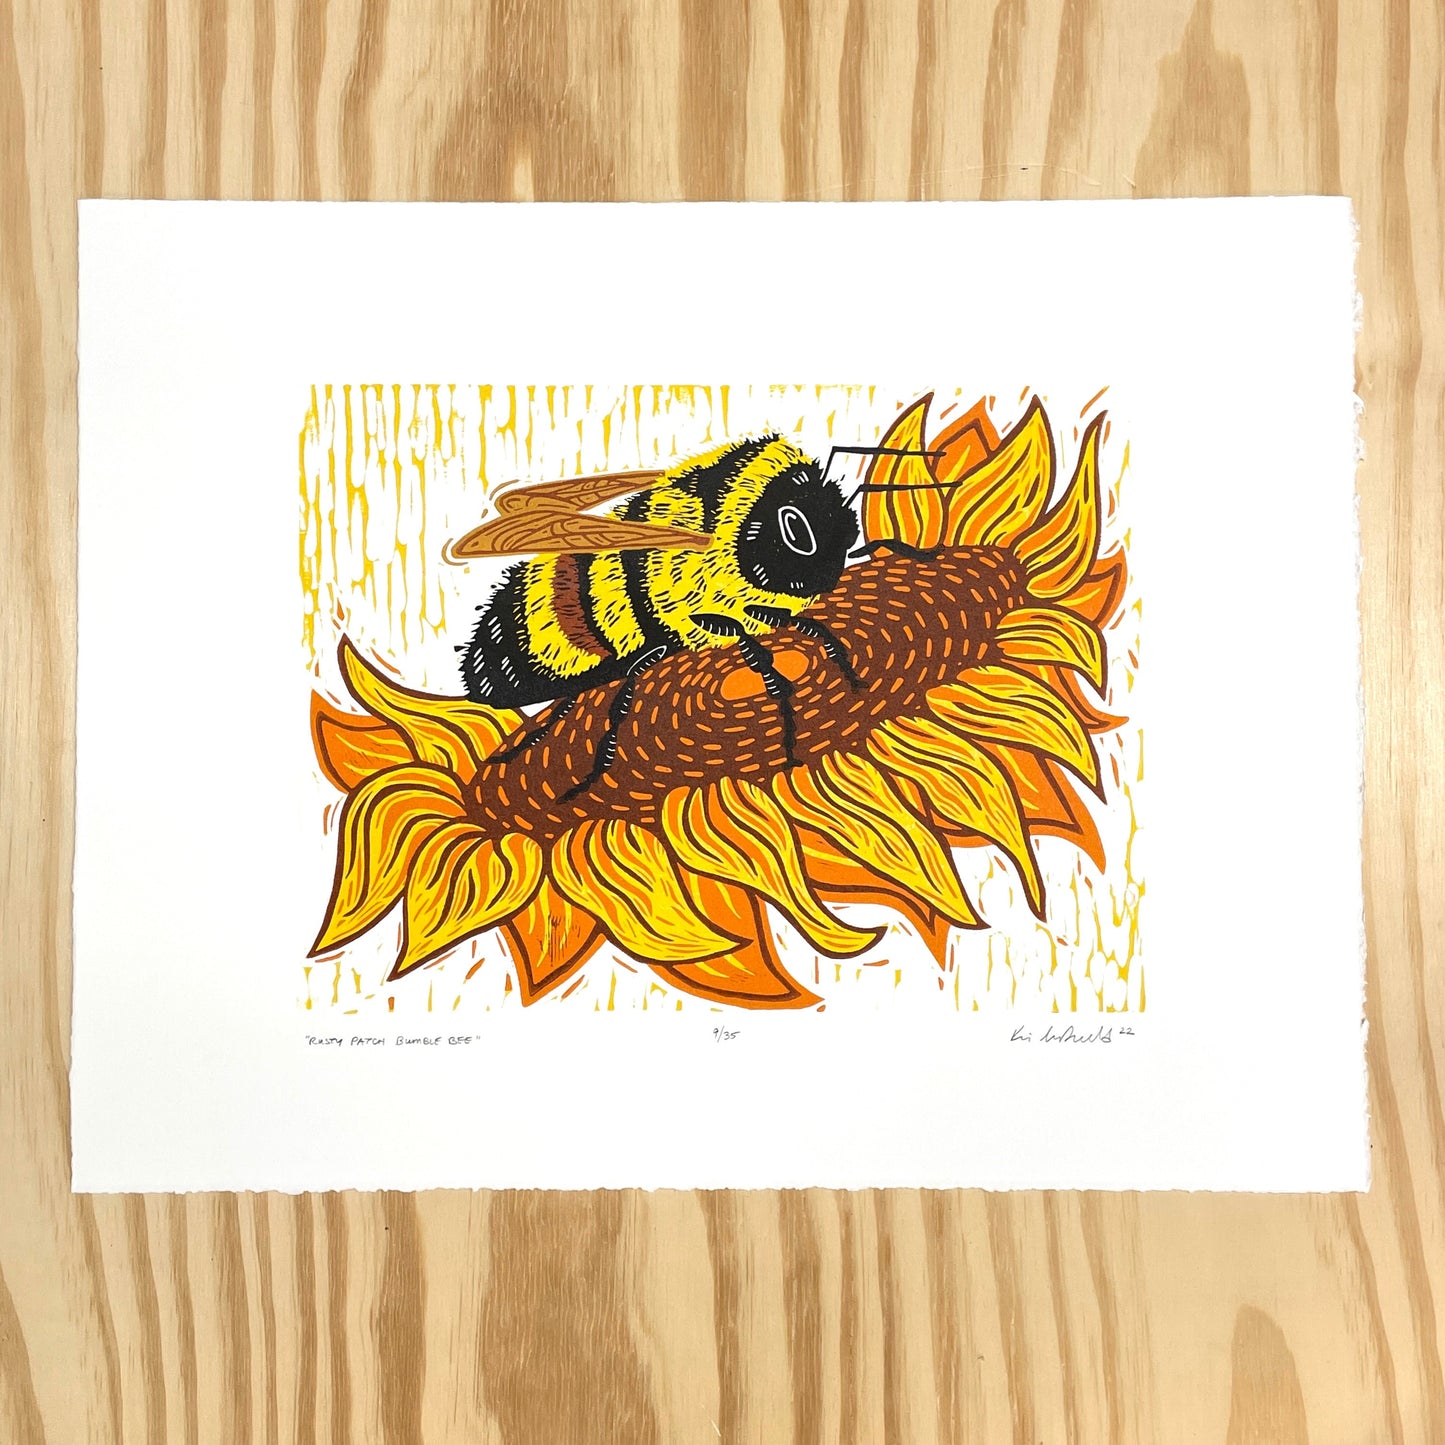 Rusty Patch Bumble Bee - woodblock print - Save Bell Bowl Prairie (14x18")